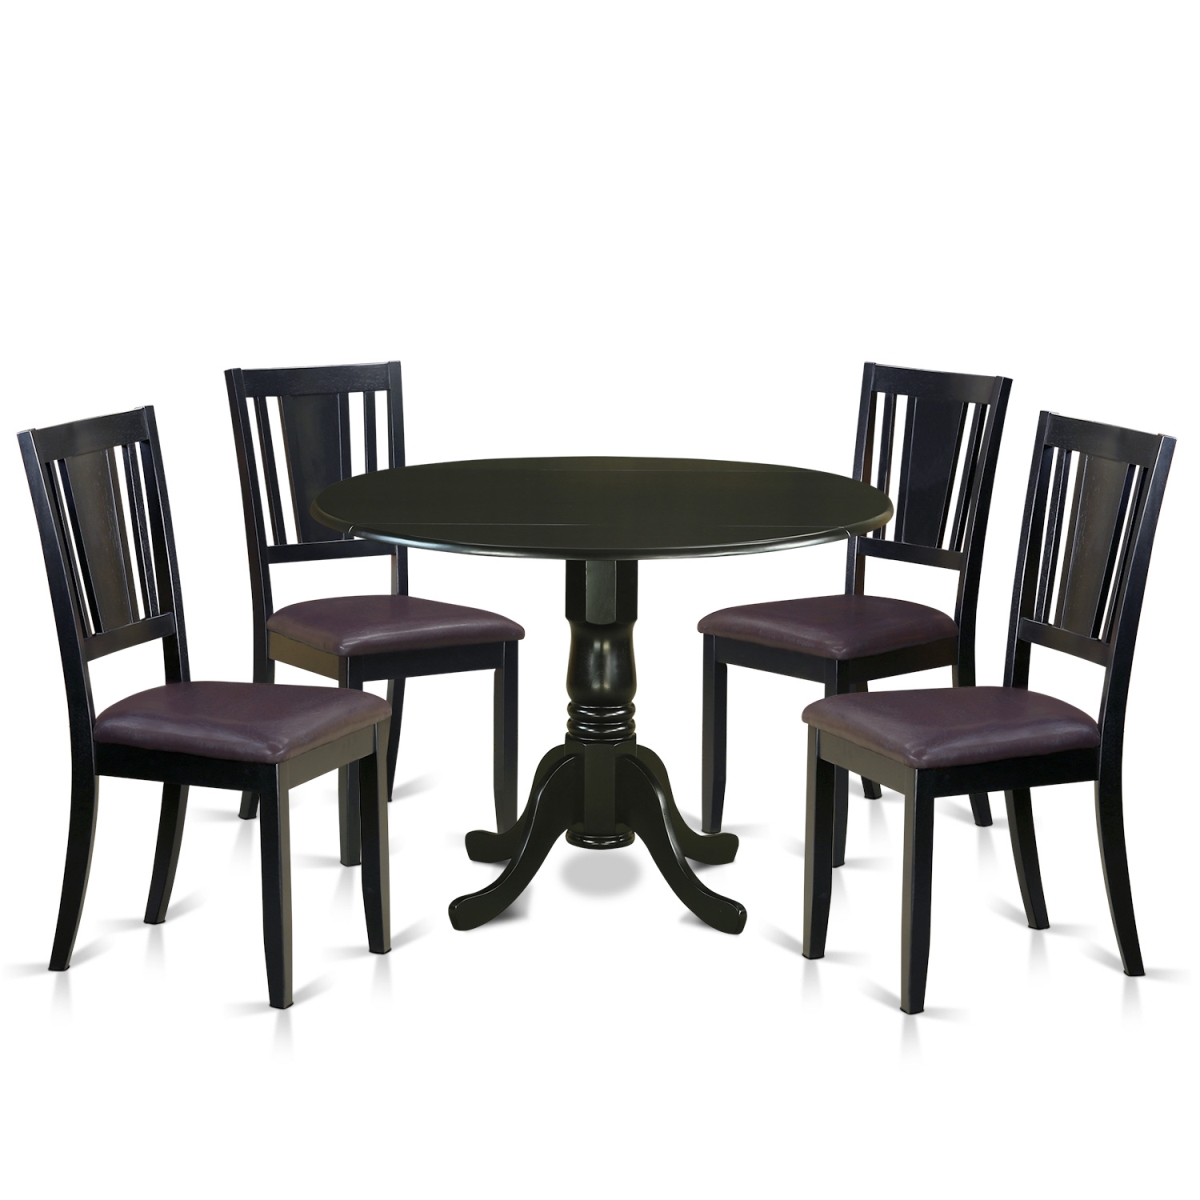 Picture of East West Furniture DLDU5-BLK-LC Dinette Set - Dining Room Table & 4 Chairs, Black - 5 Piece